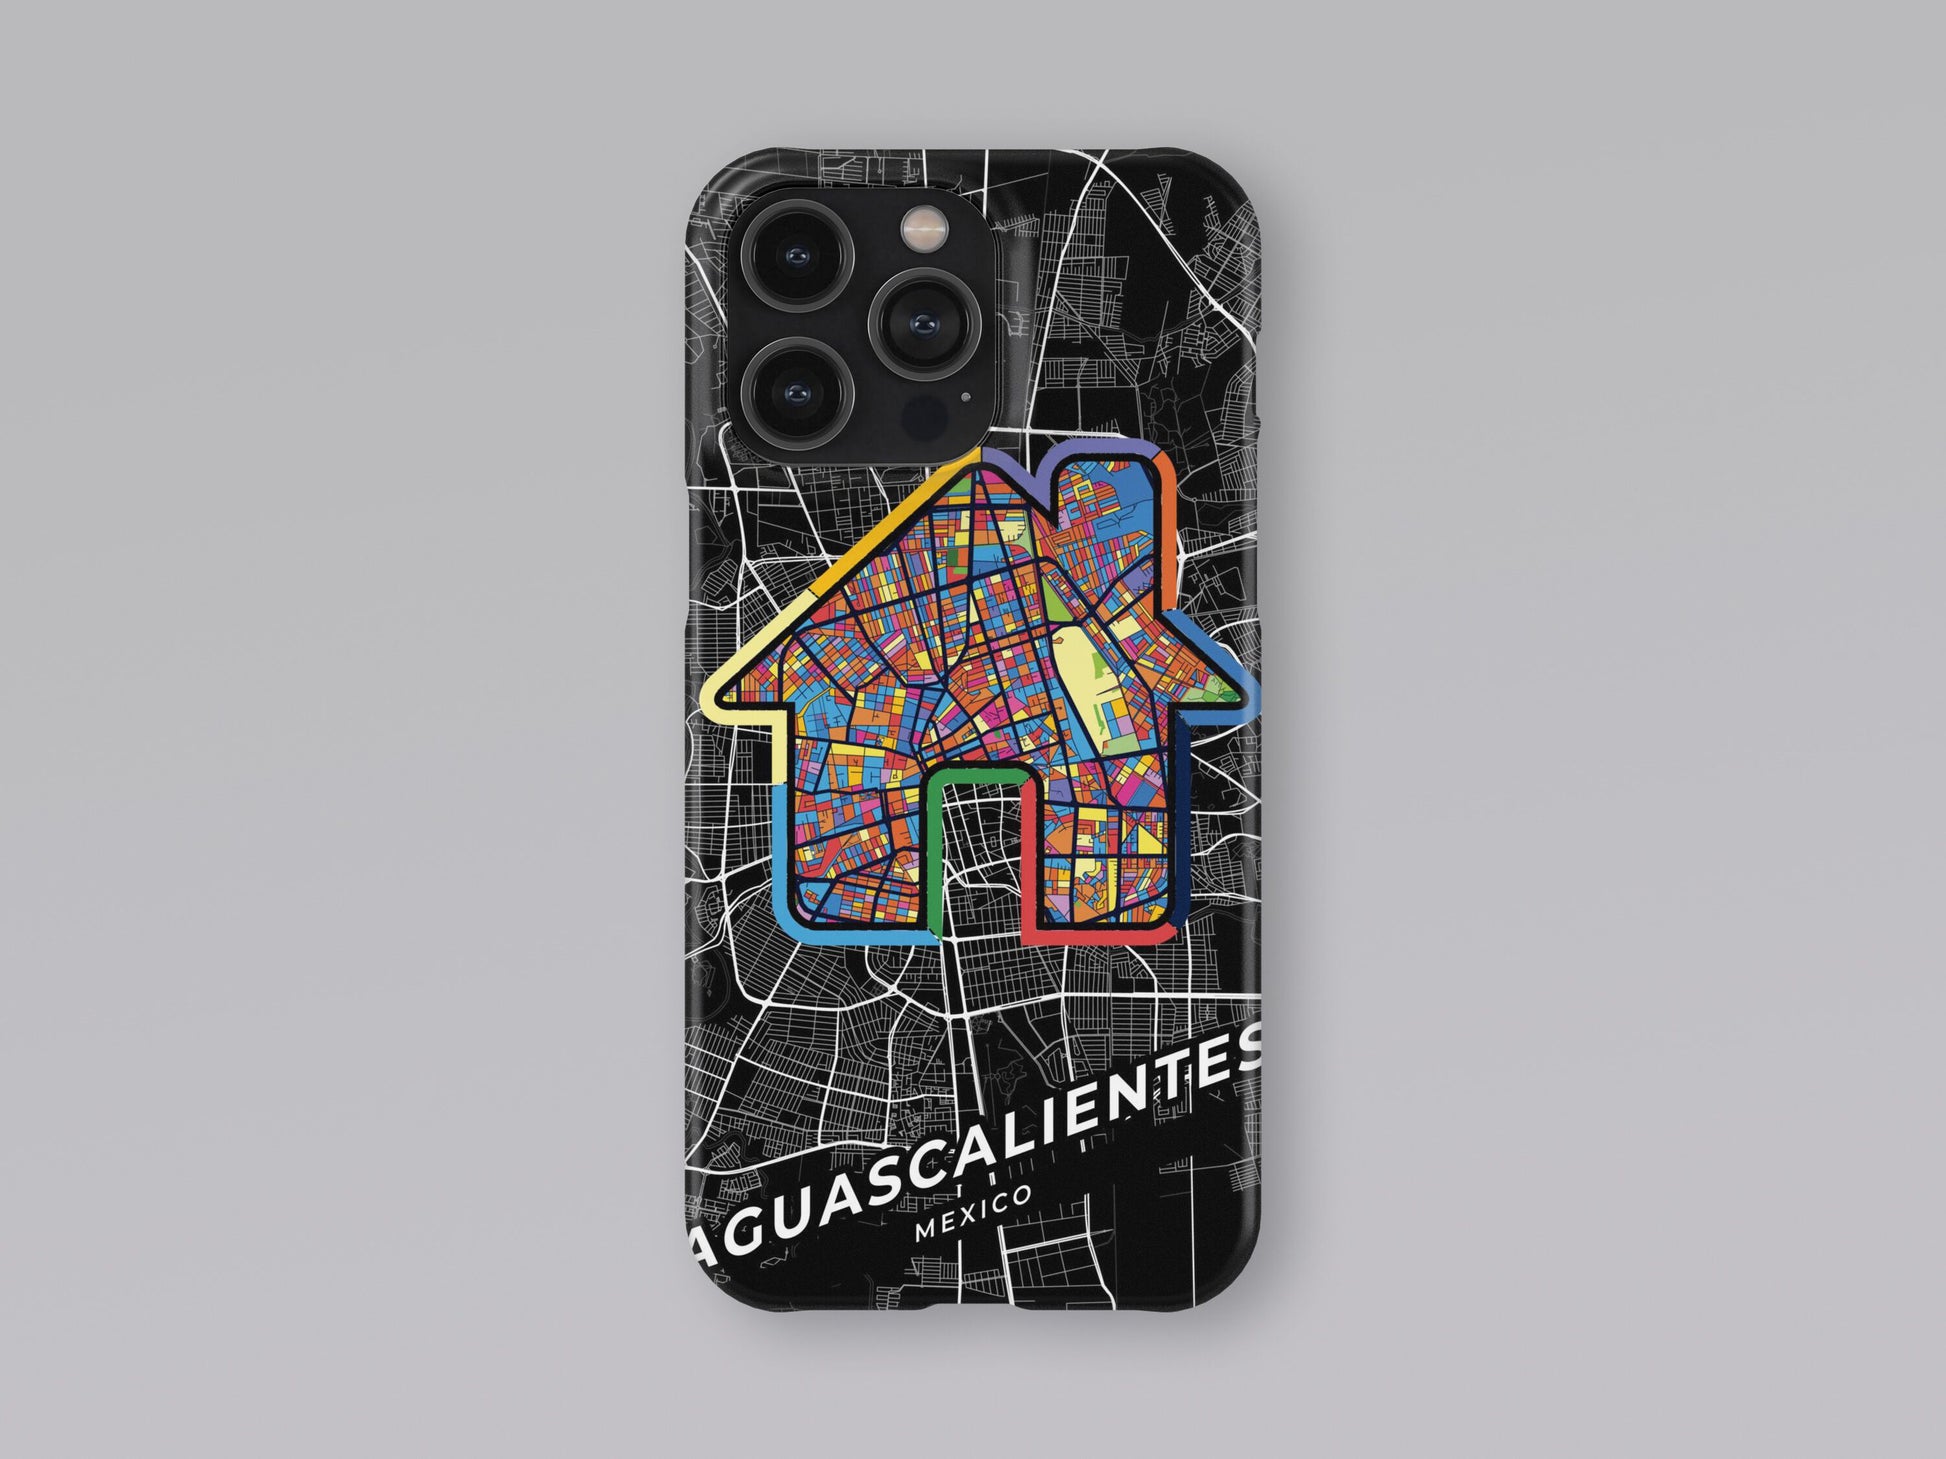 Aguascalientes Mexico slim phone case with colorful icon. Birthday, wedding or housewarming gift. Couple match cases. 3